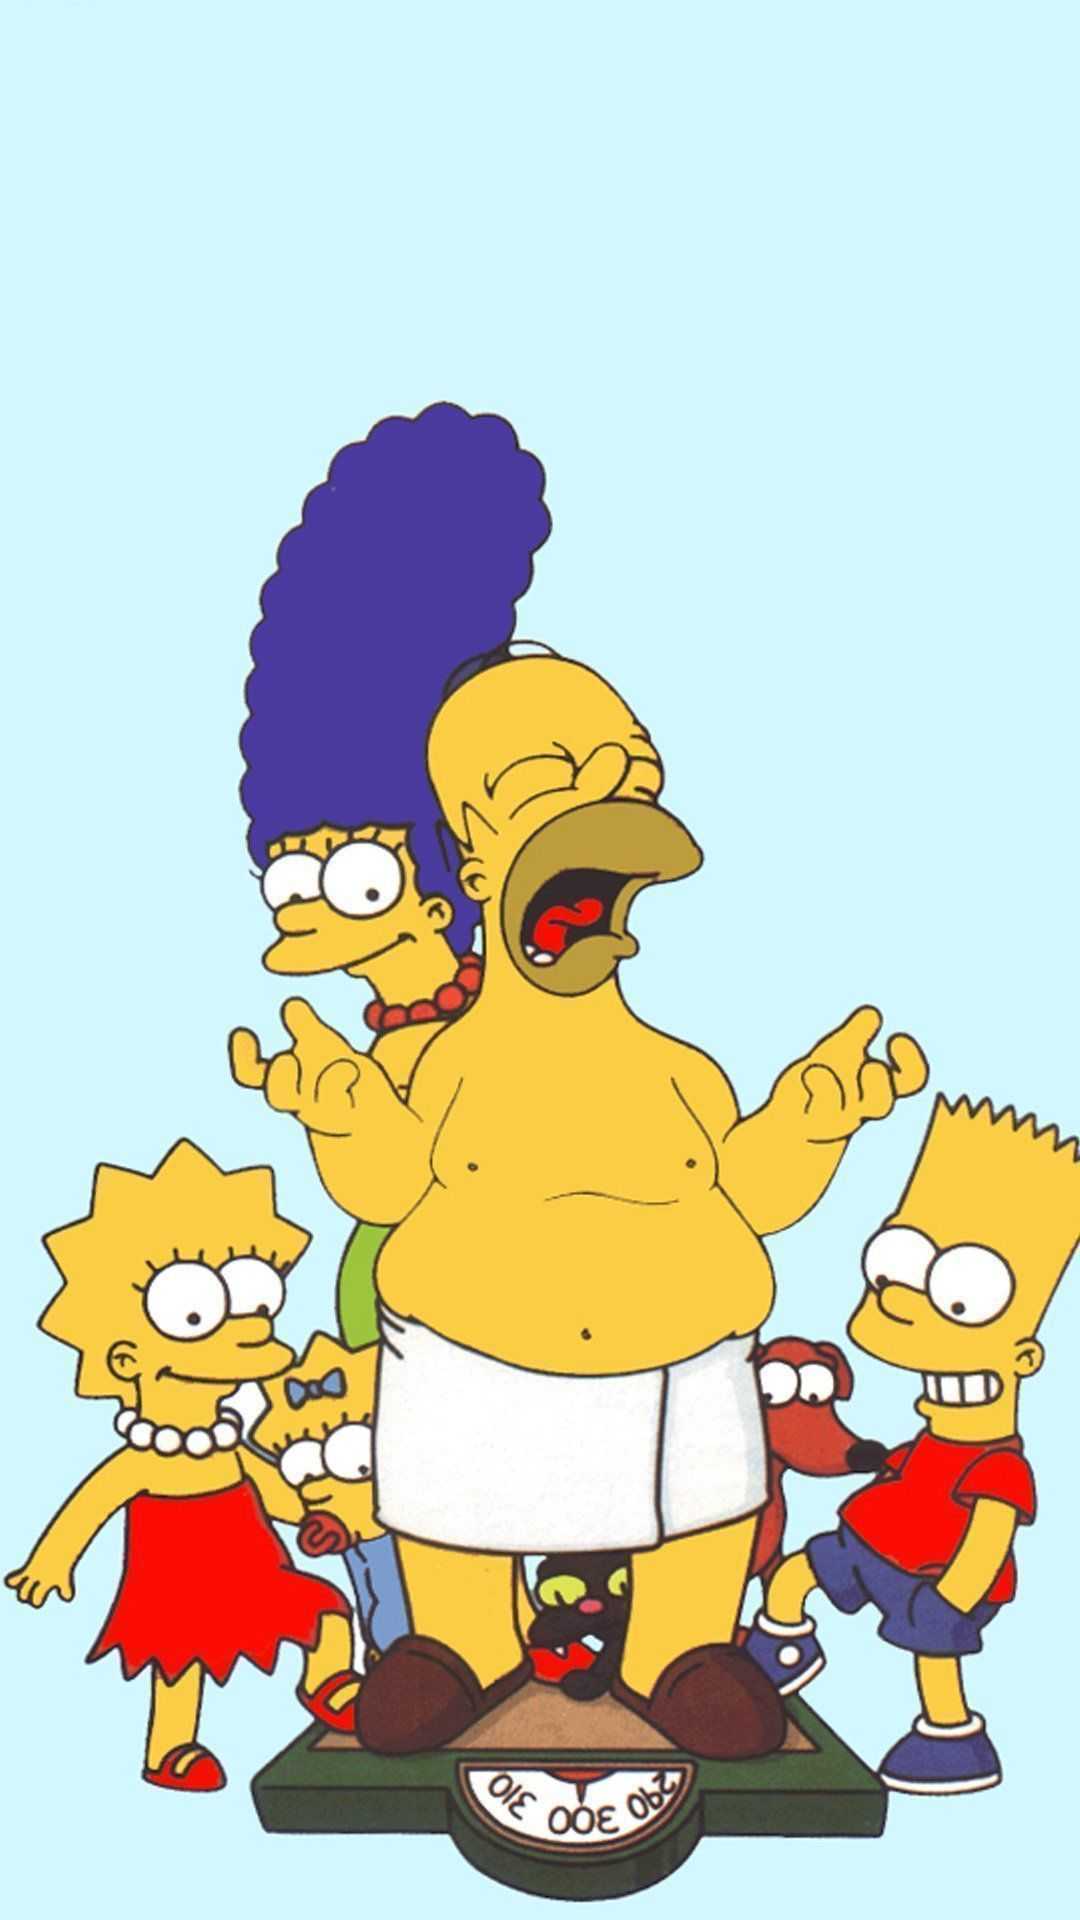 Simpson family iPhone 8 wallpaper with high-resolution 1080x1920 pixel. You can use this wallpaper for your iPhone 5, 6, 7, 8, X, XS, XR backgrounds, Mobile Screensaver, or iPad Lock Screen - The Simpsons